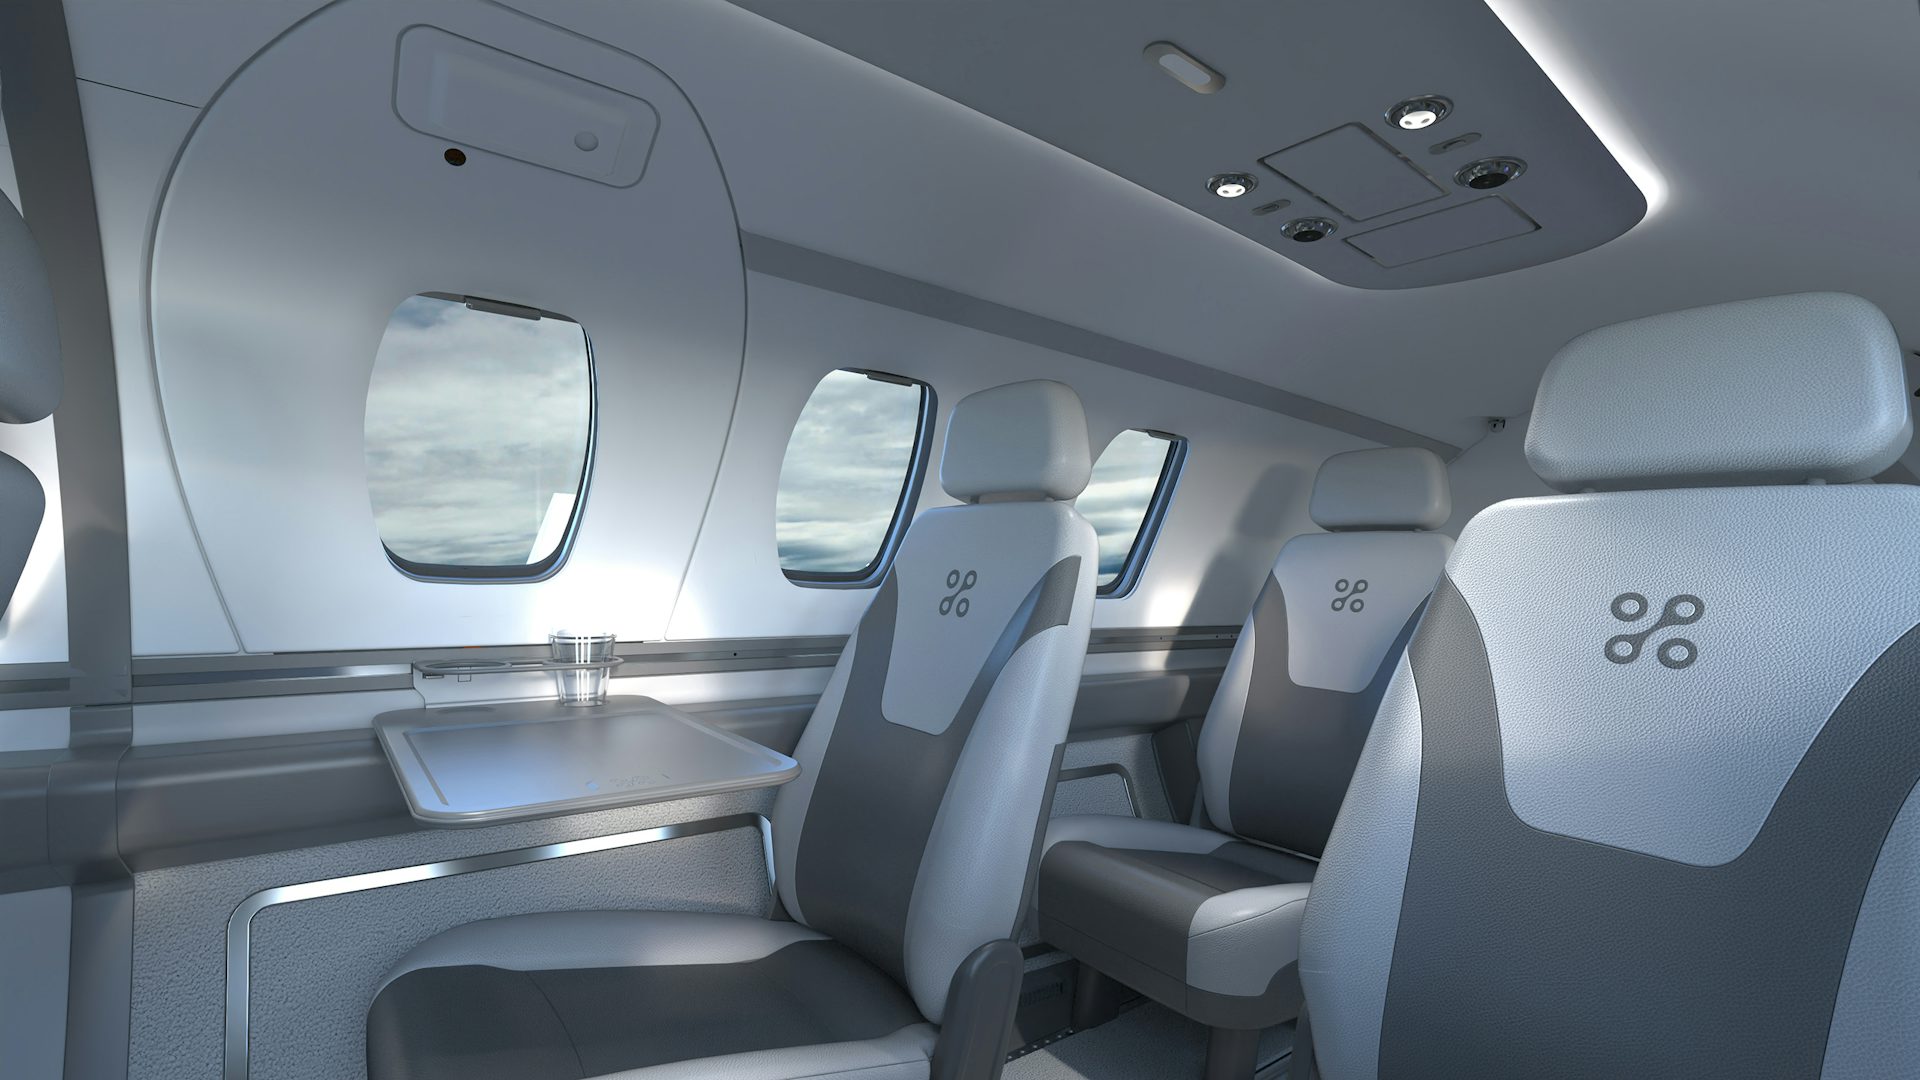 A photorealistic image of the interior of an aircraft is generated from a computer-aided design model using visualizaton software.